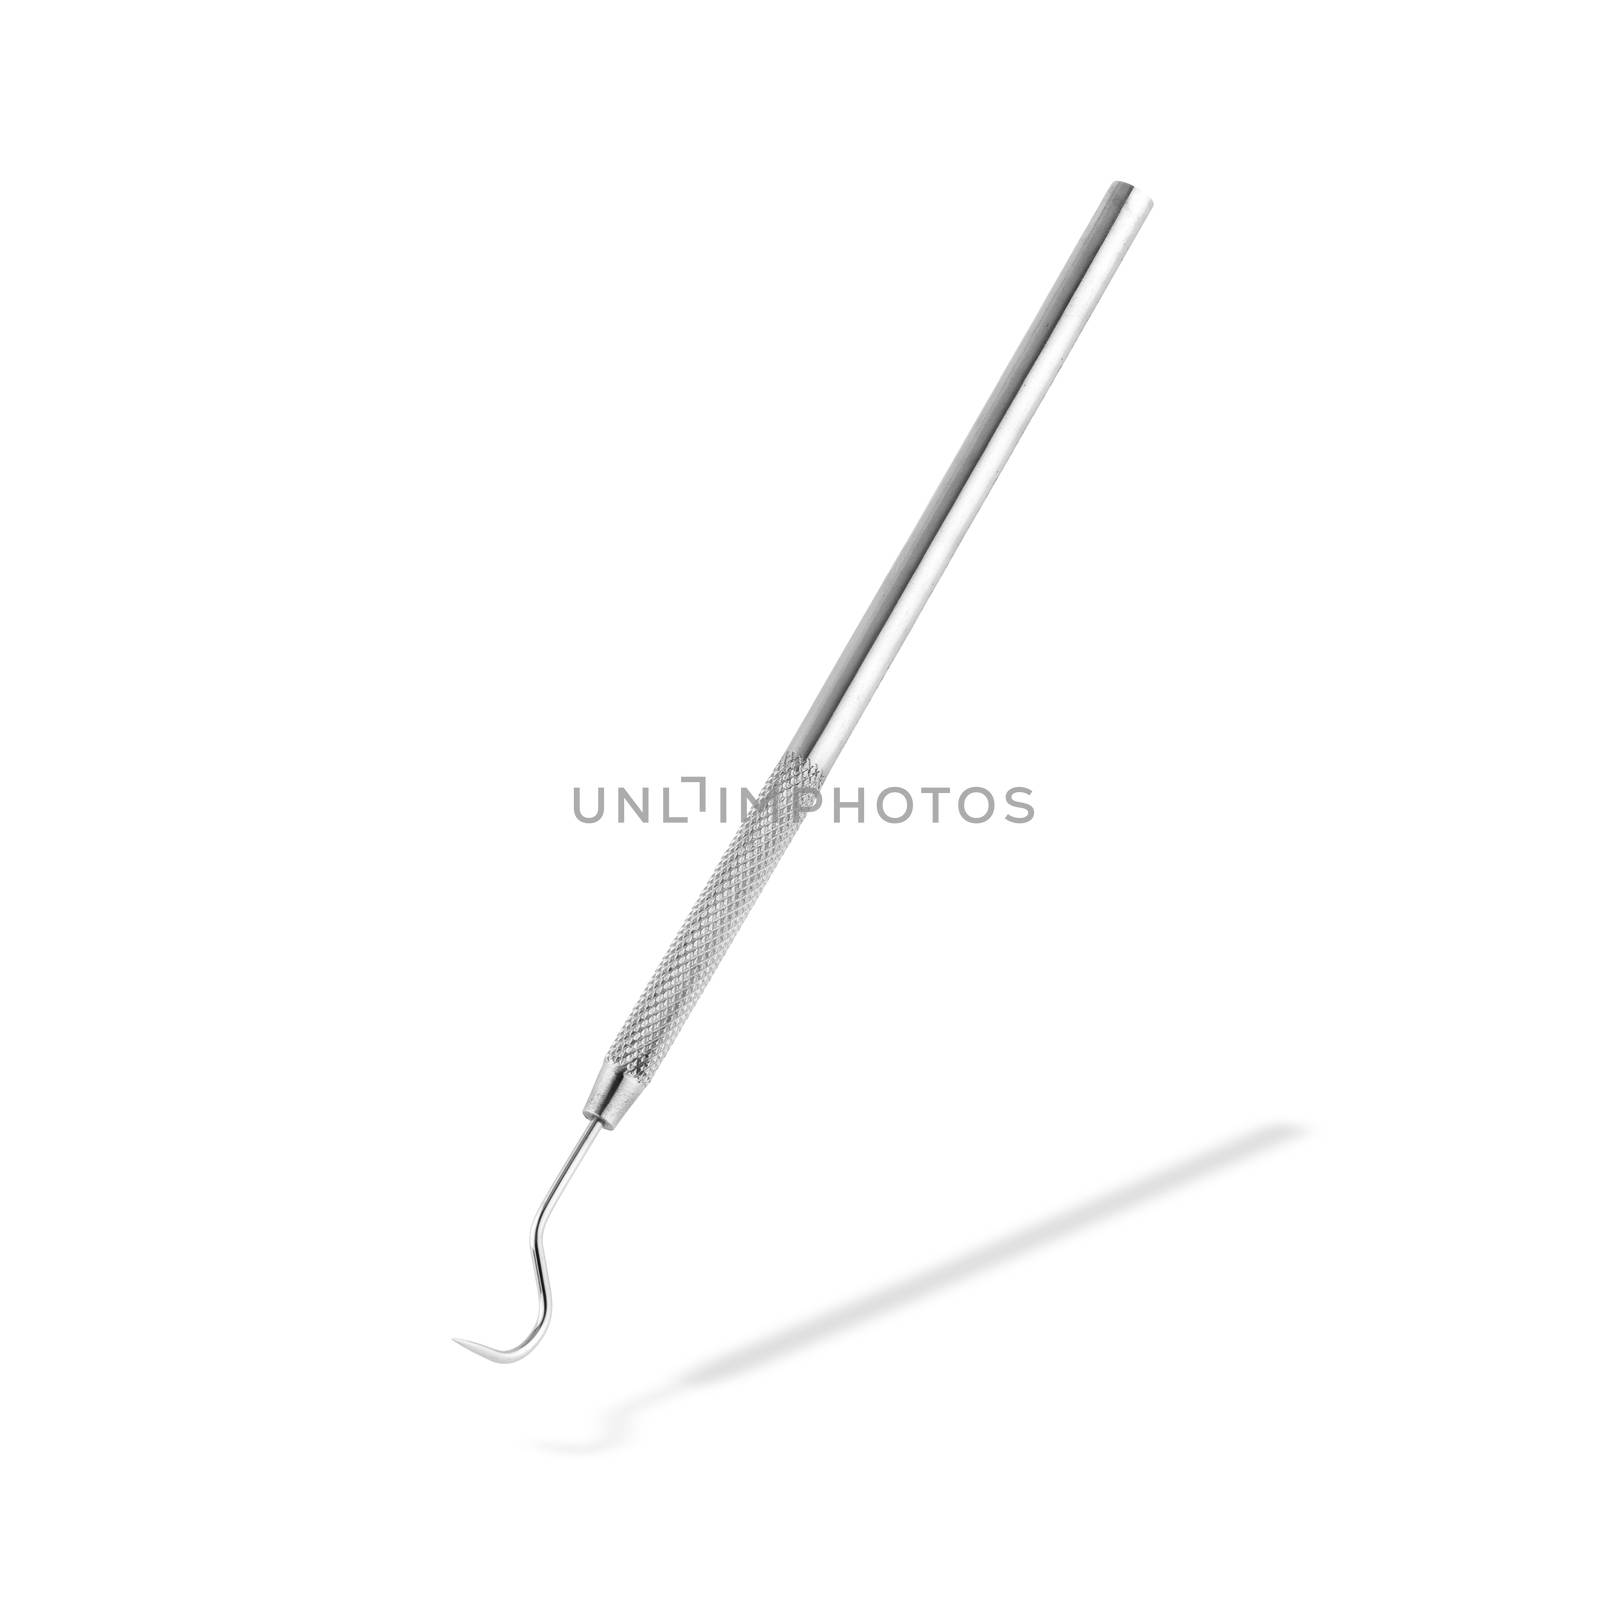 Dentist's sickle probe dental explorer on white with drop shadow by VivacityImages